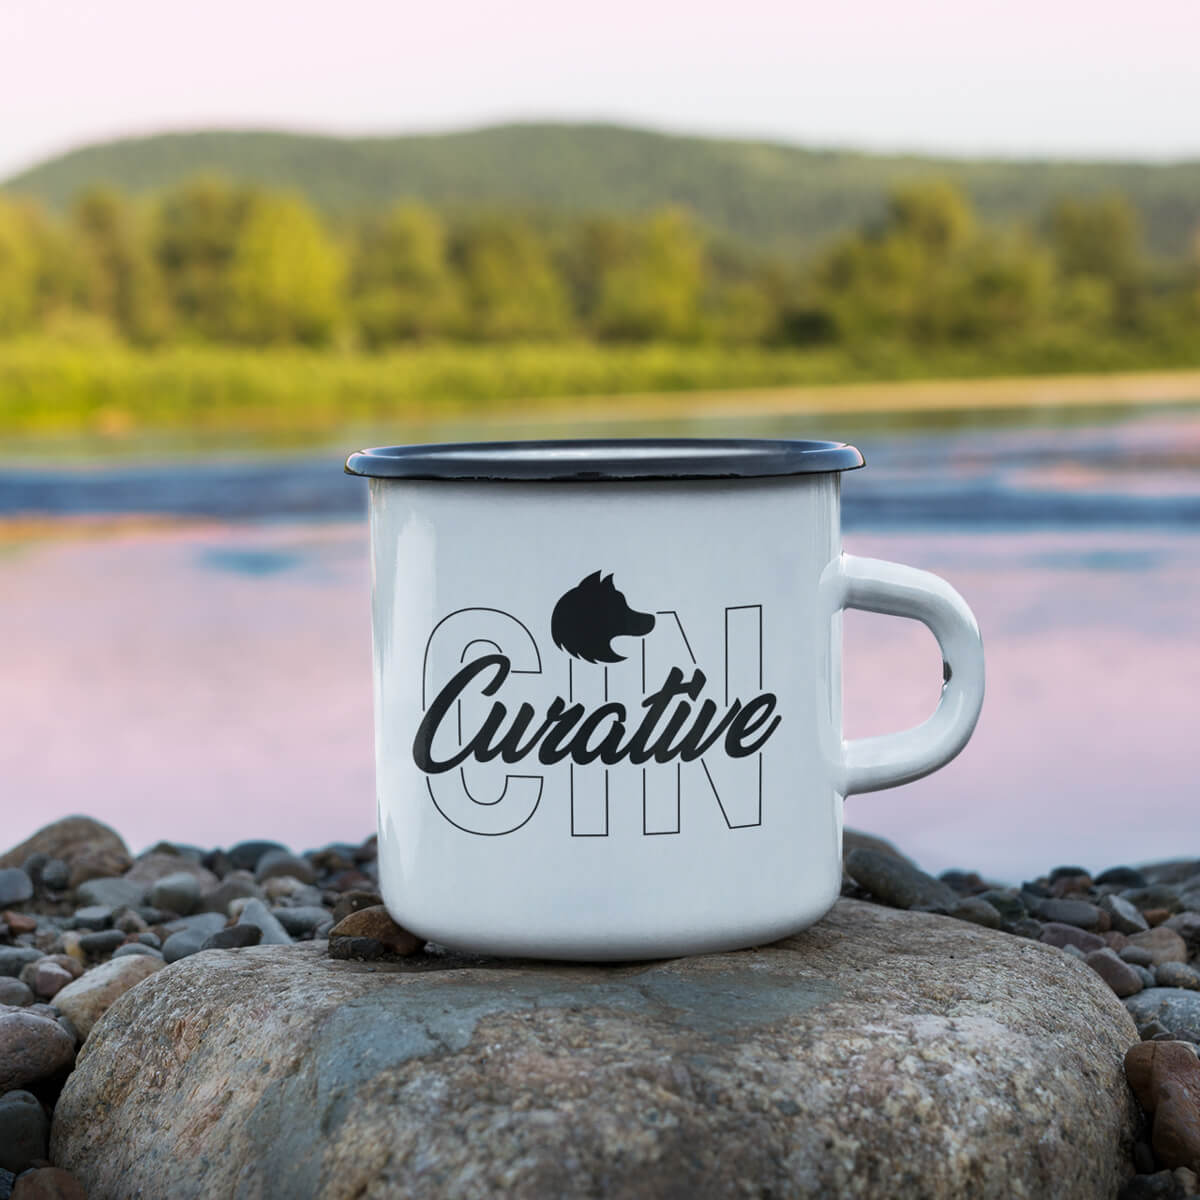 Outdoor scene with white enamel mugs custom promotional drinkware by curative printing